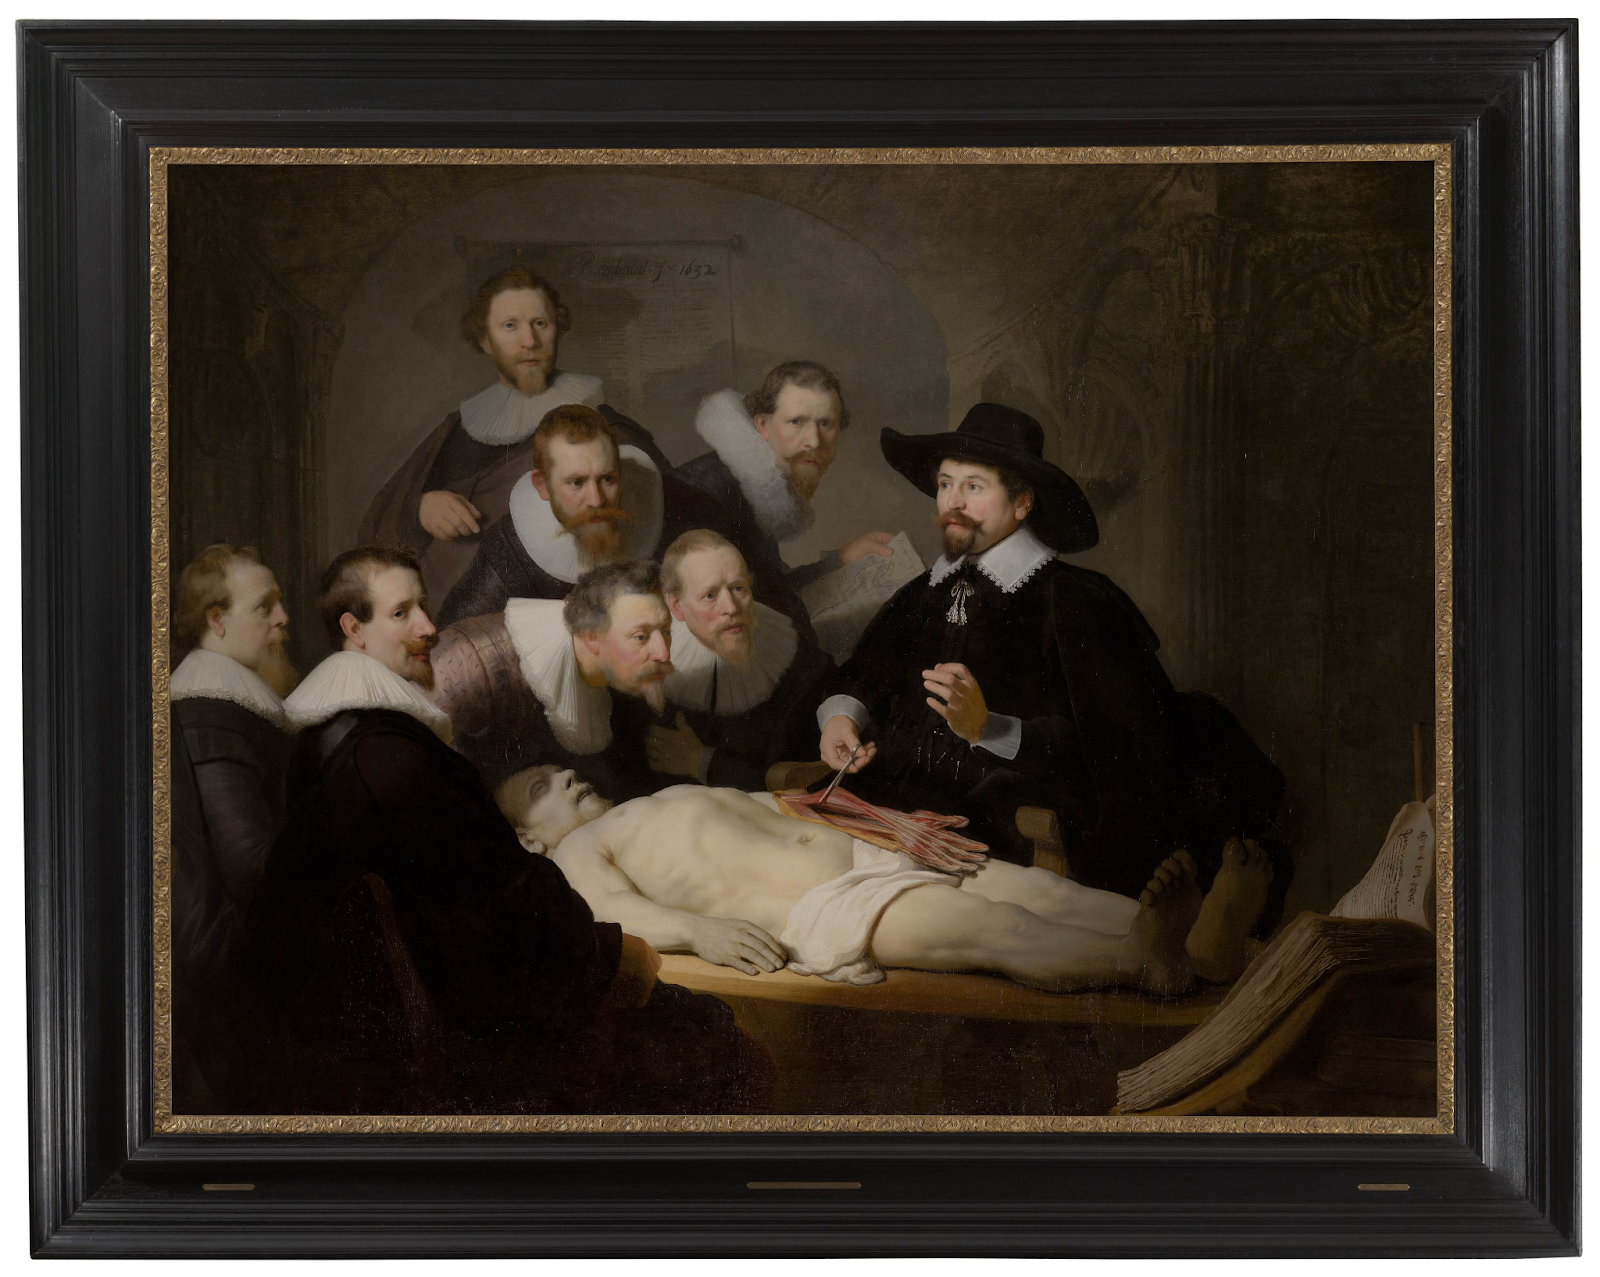 The Anatomy Lesson of Dr. Nicholaes Tulp, 1632 by Rembrandt